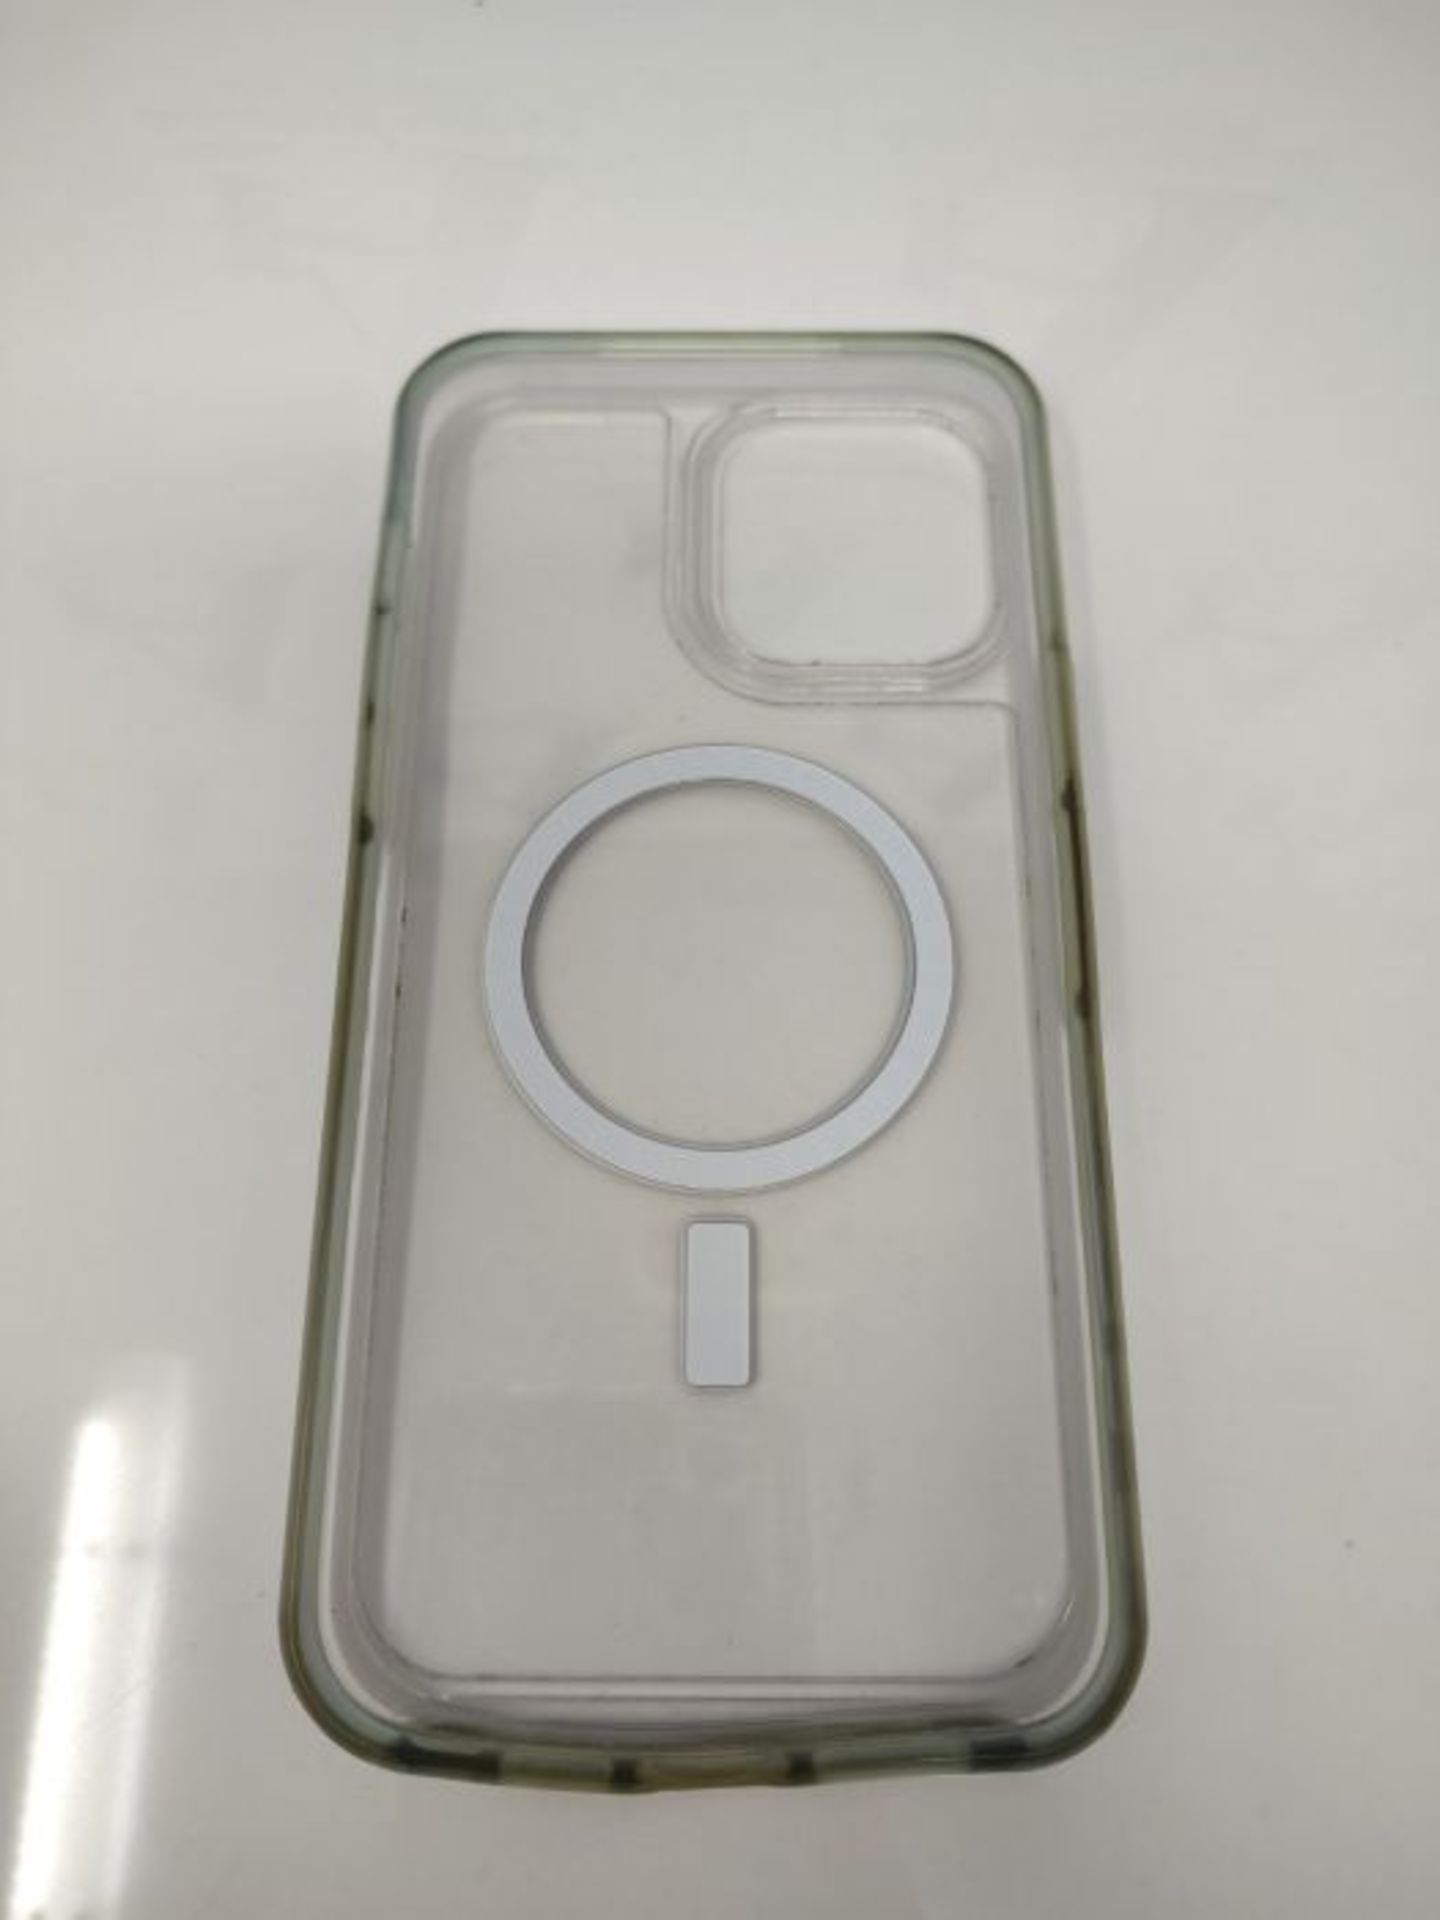 OtterBox Symmetry+ Clear Case for iPhone 13 Pro Max / iPhone 12 Pro Max for MagSafe, S - Image 5 of 6